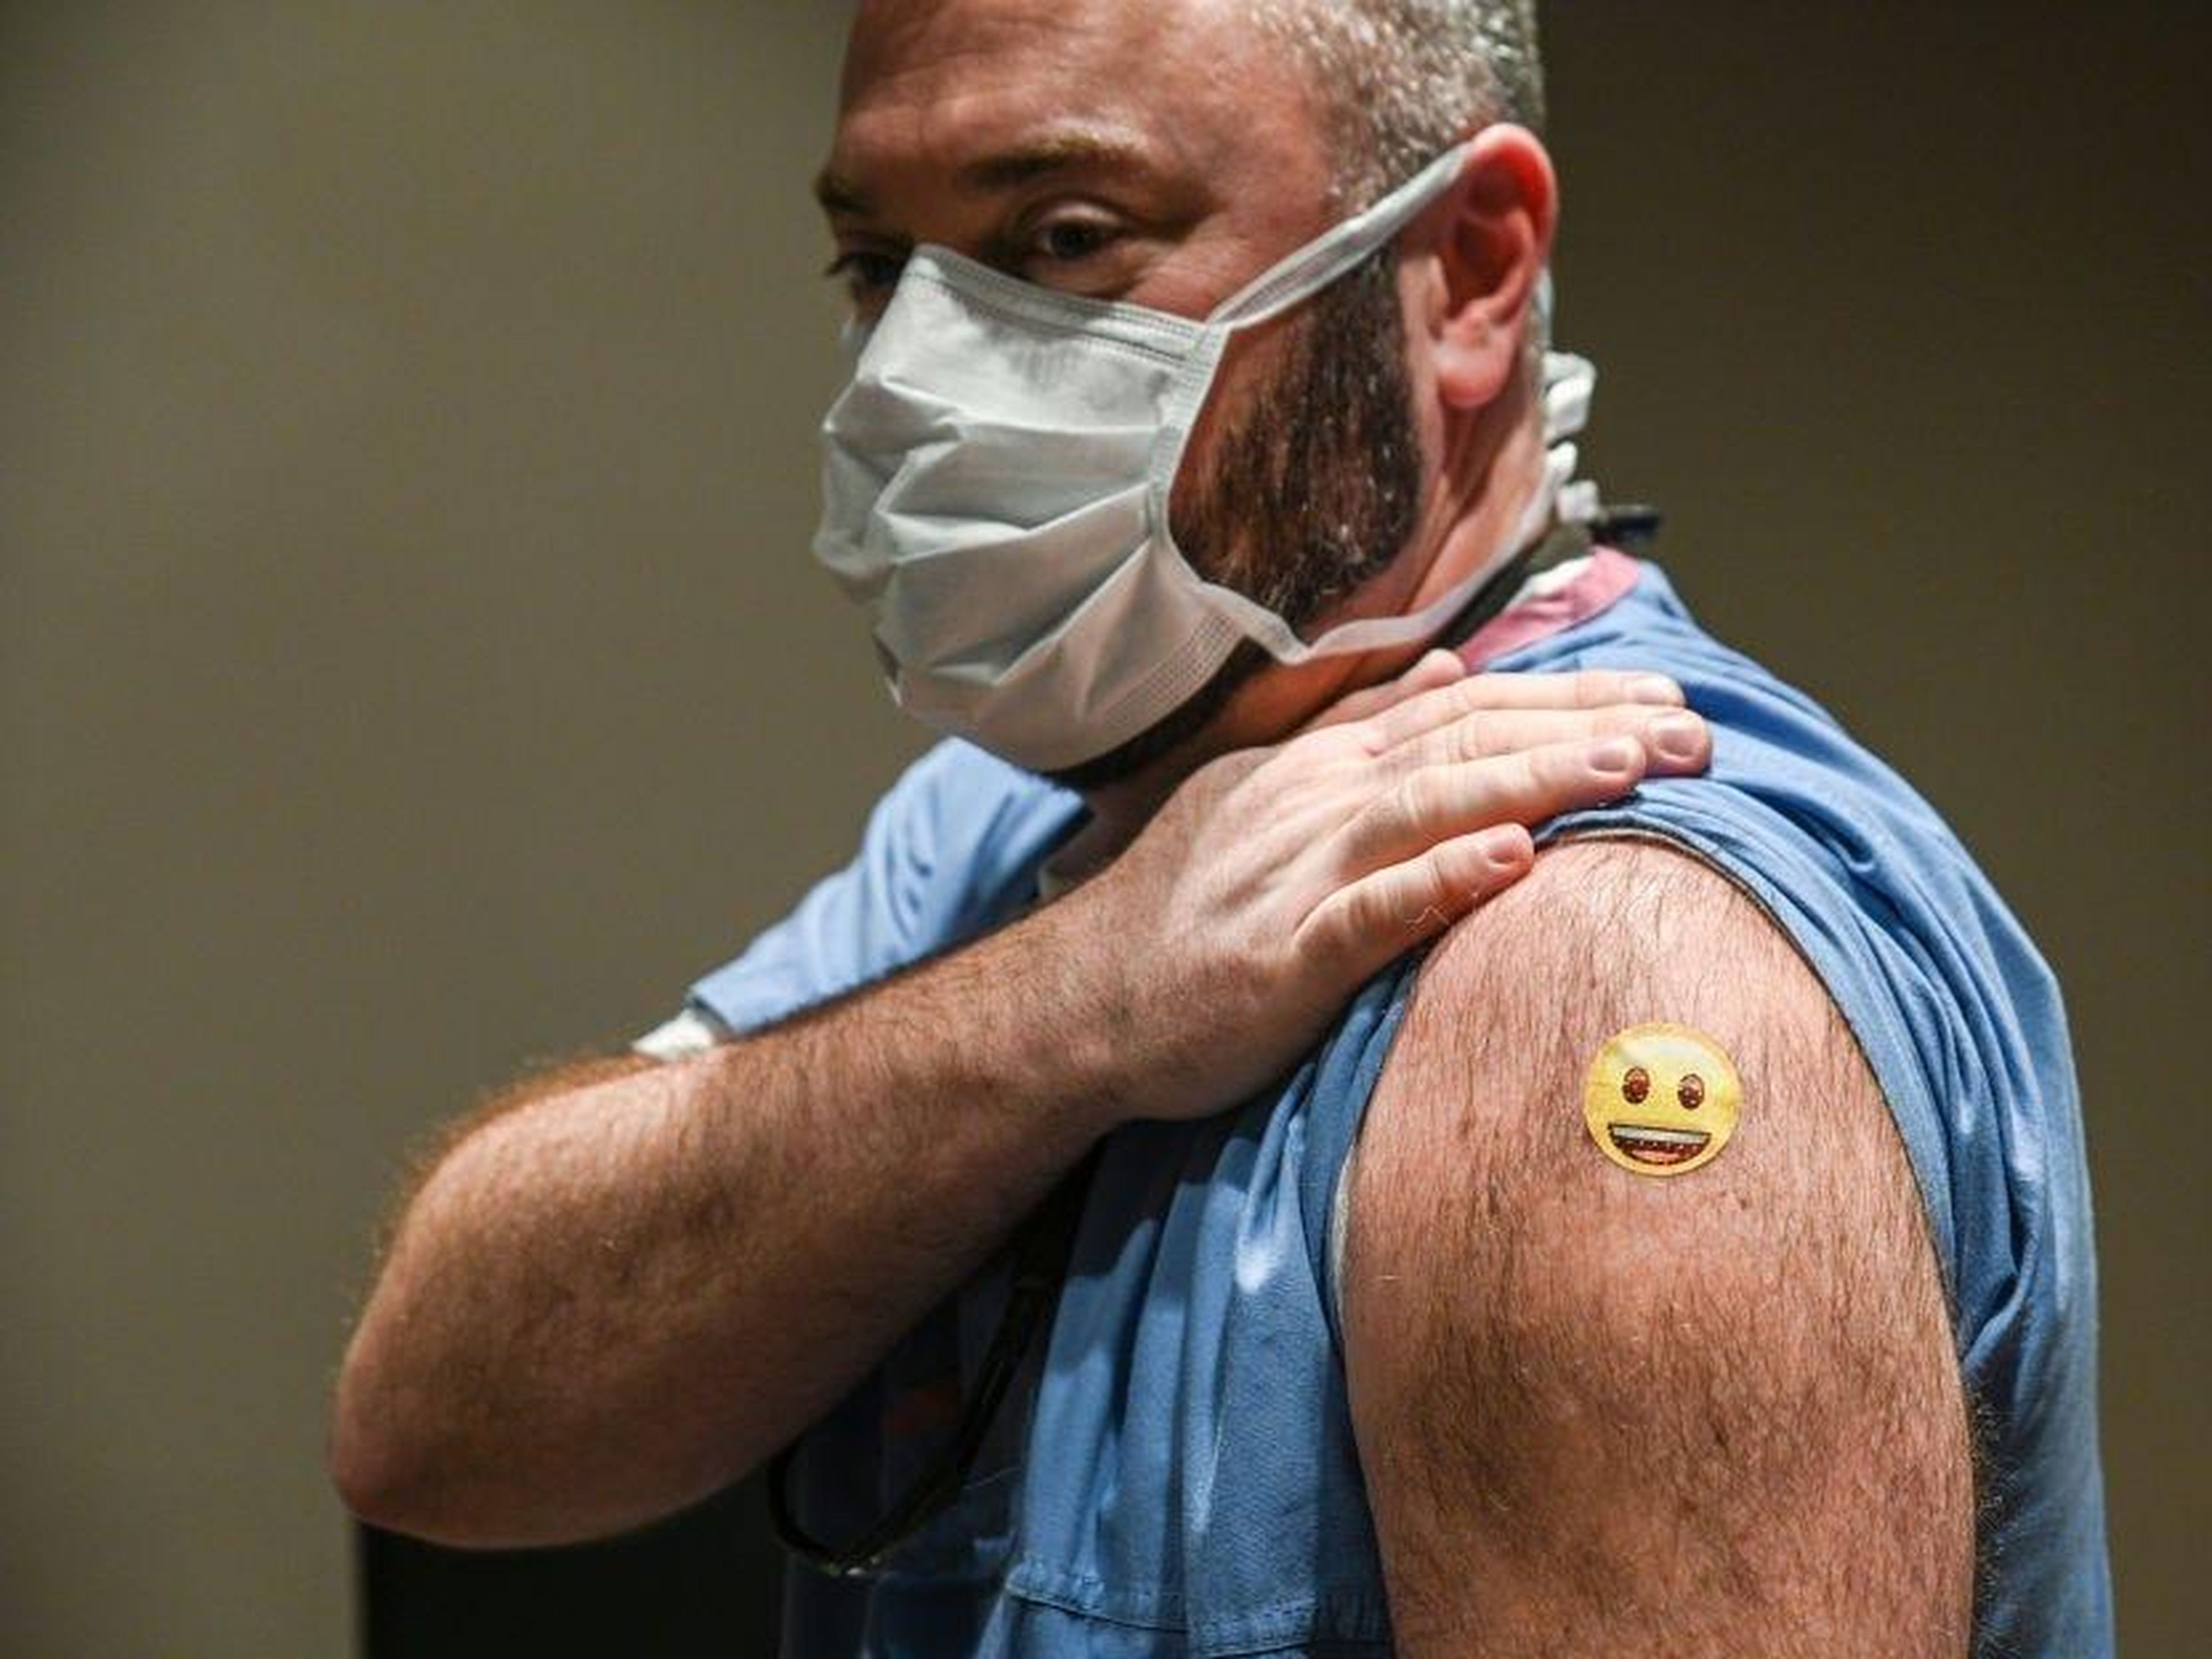 Dr. Jason Smith showed off his bandage after getting vaccinated at the University of Louisville Hospital in Kentucky.